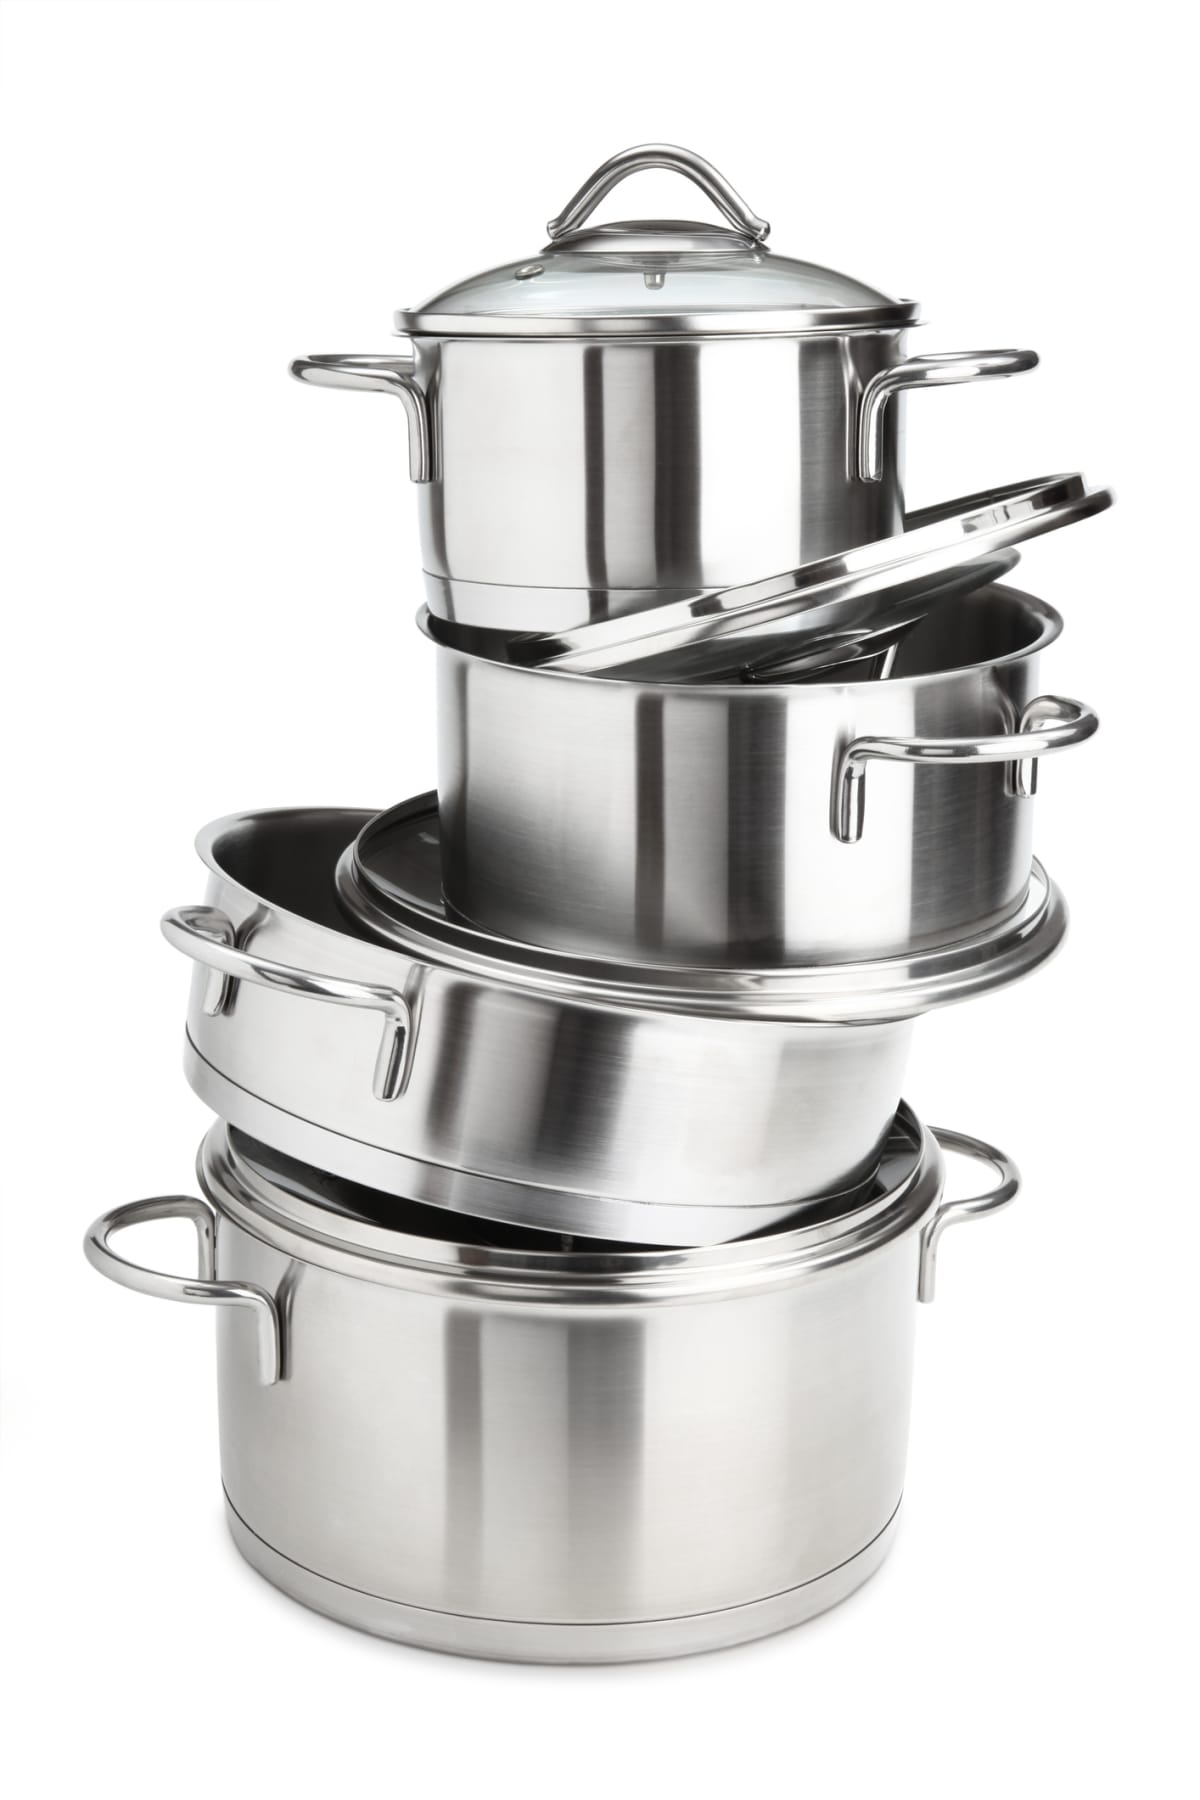 A stack of stainless-steel saucepans on white background.